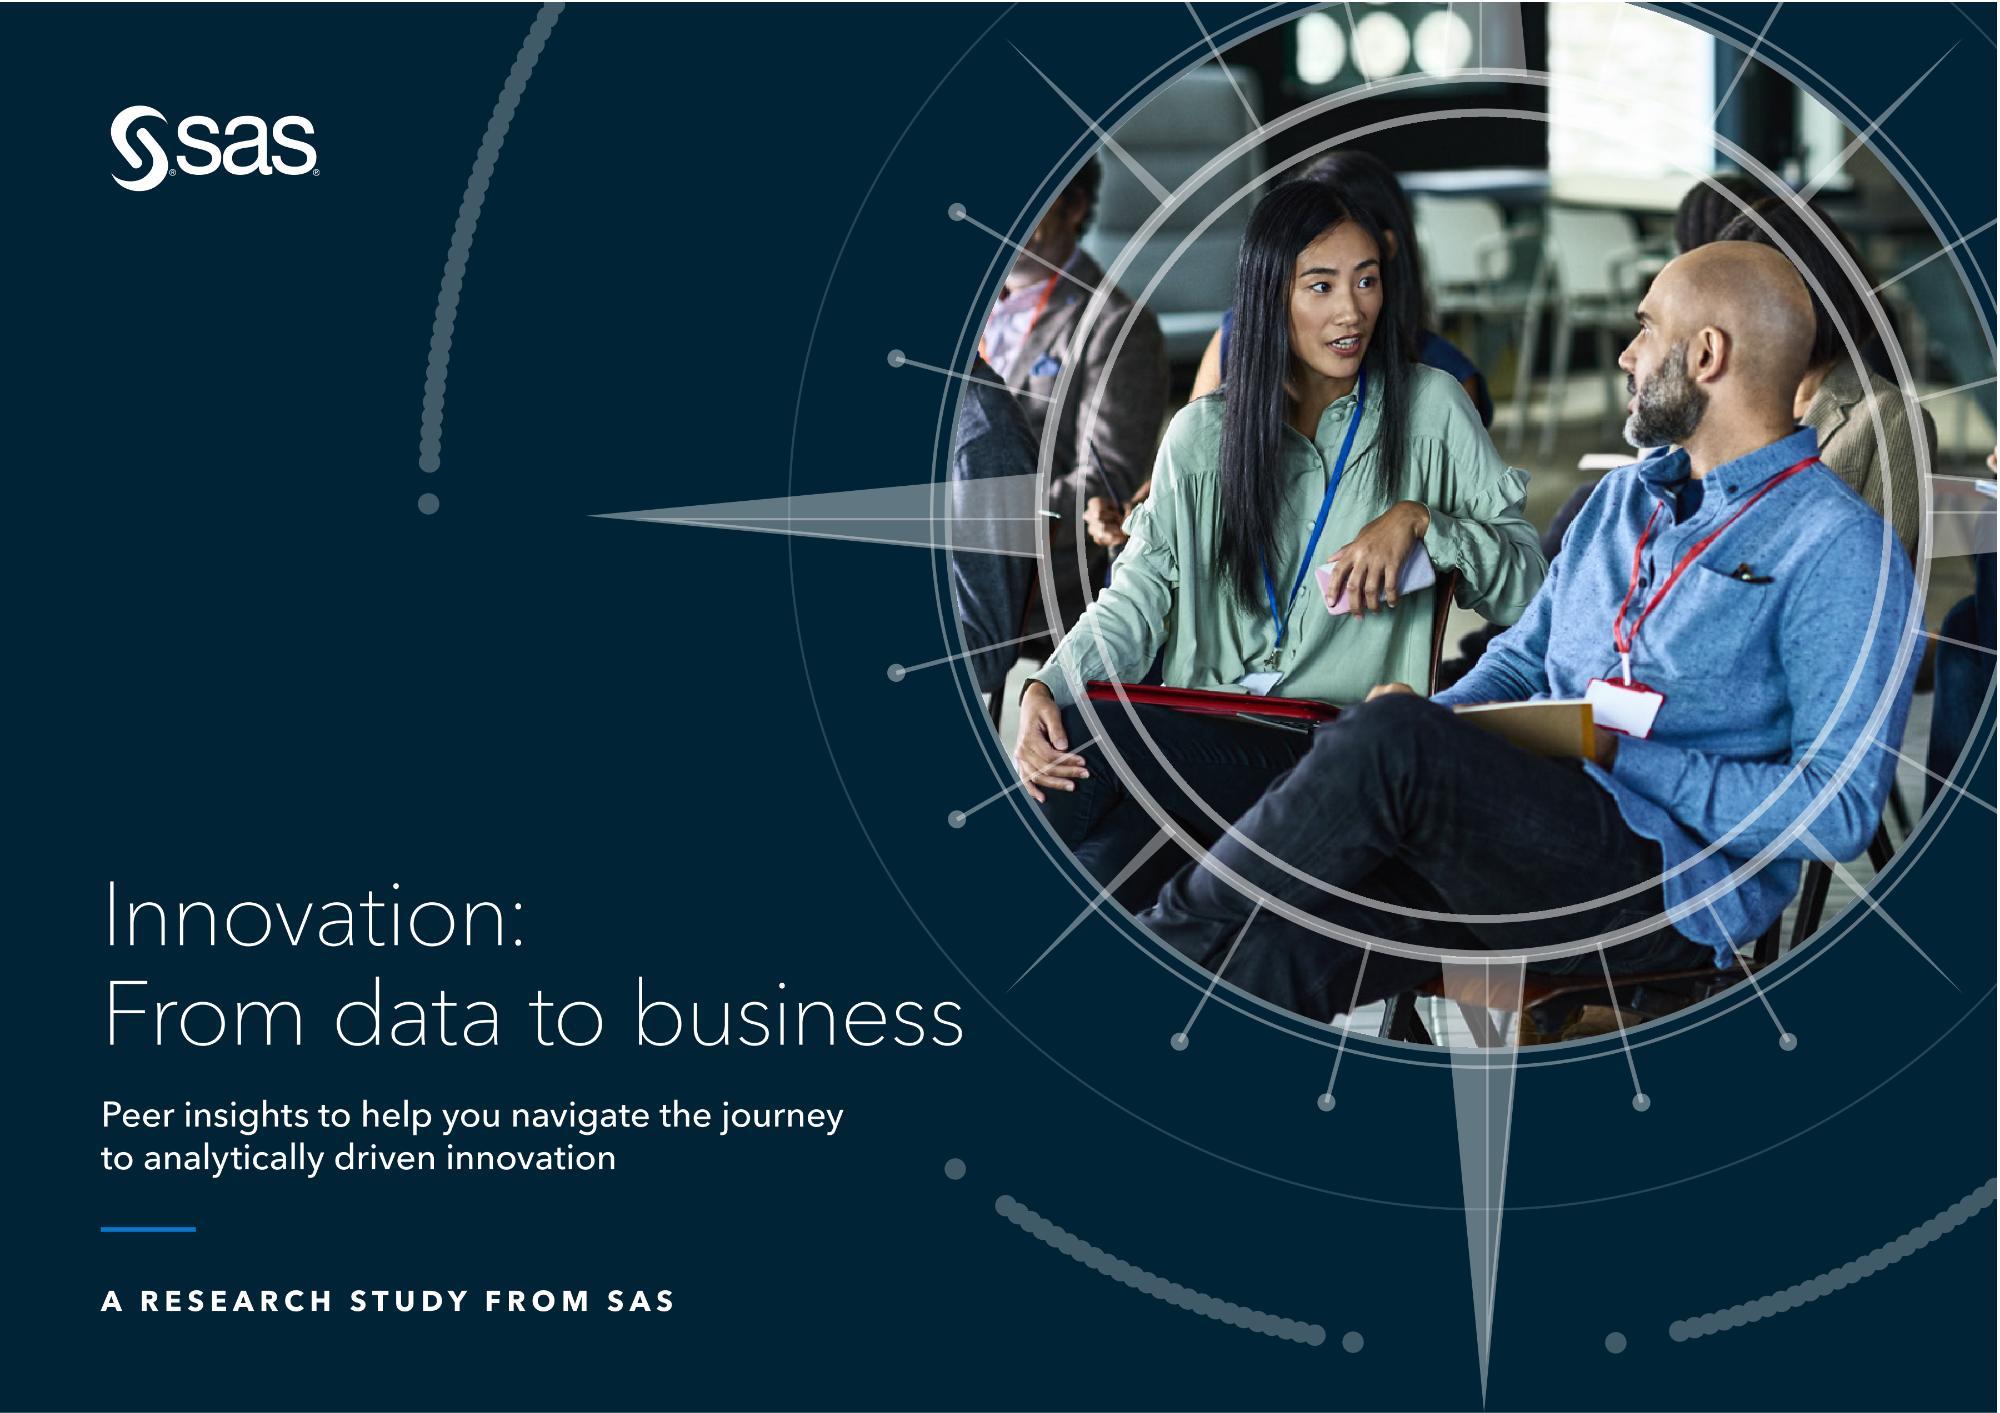 Innovation: From data to business